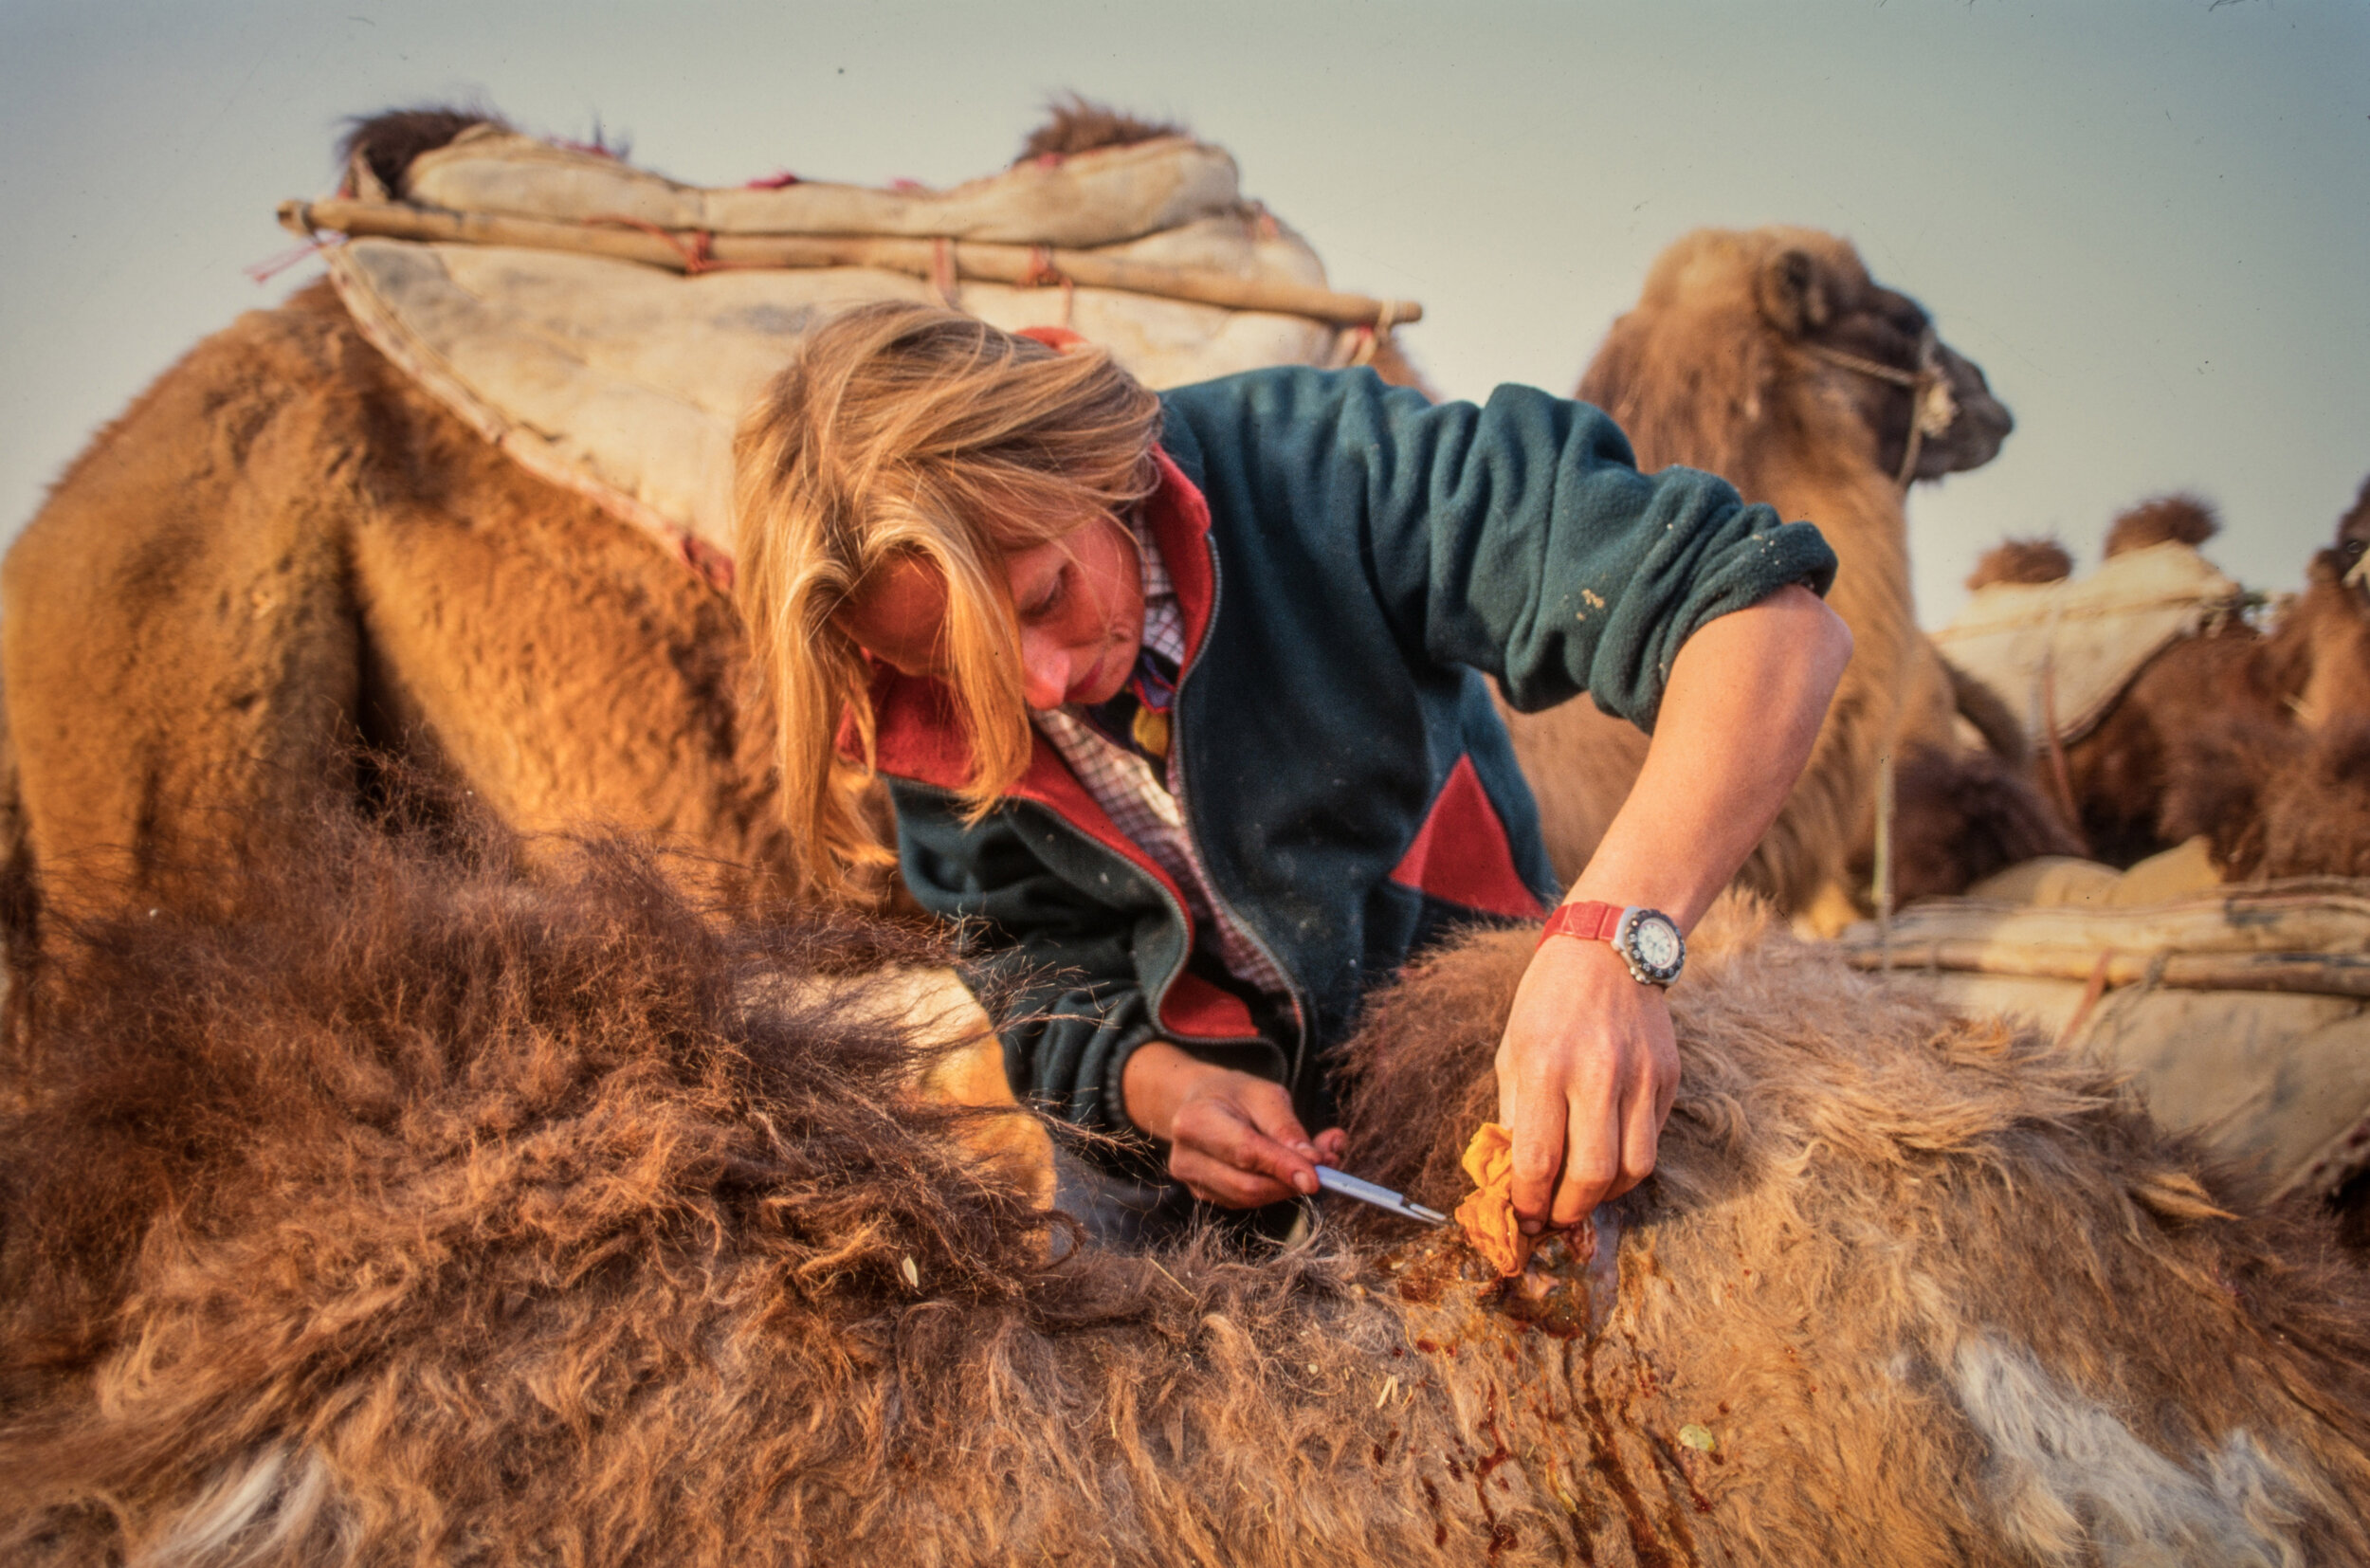  Carolyn cleaning and infected saddle sore on a camel.  